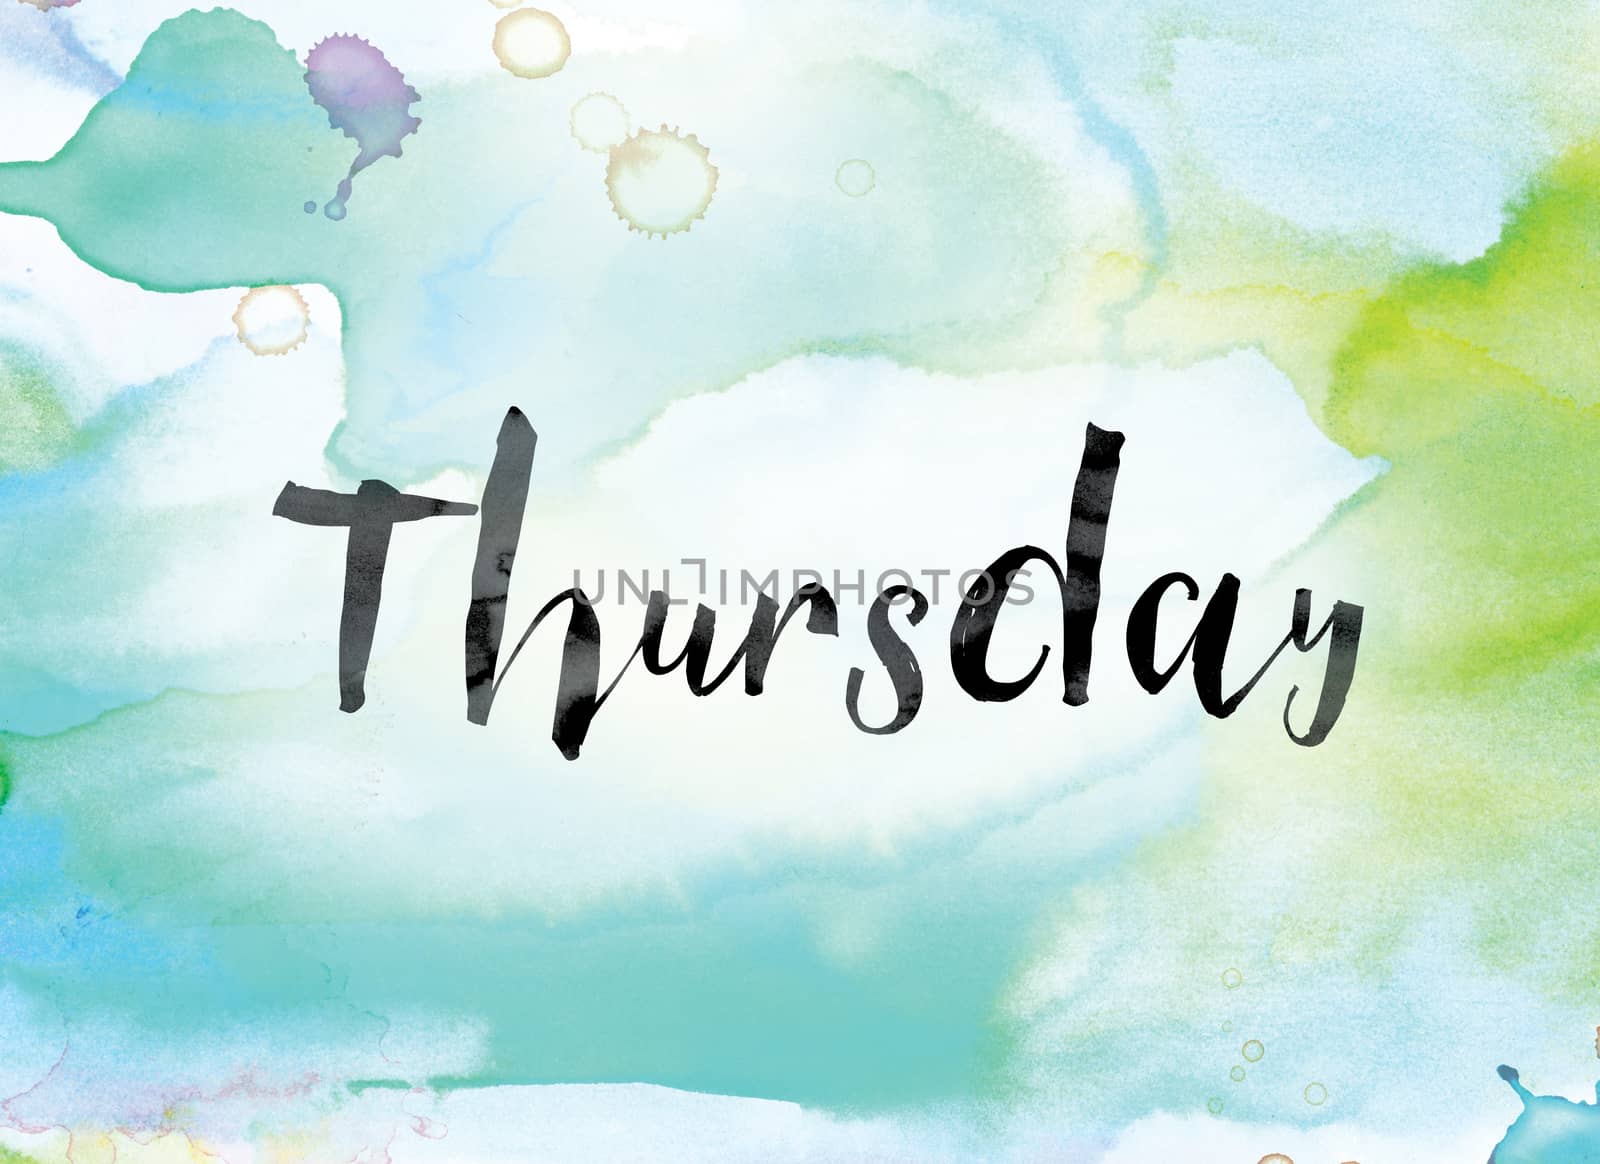 The word "Thursday" painted in black ink over a colorful watercolor washed background concept and theme.